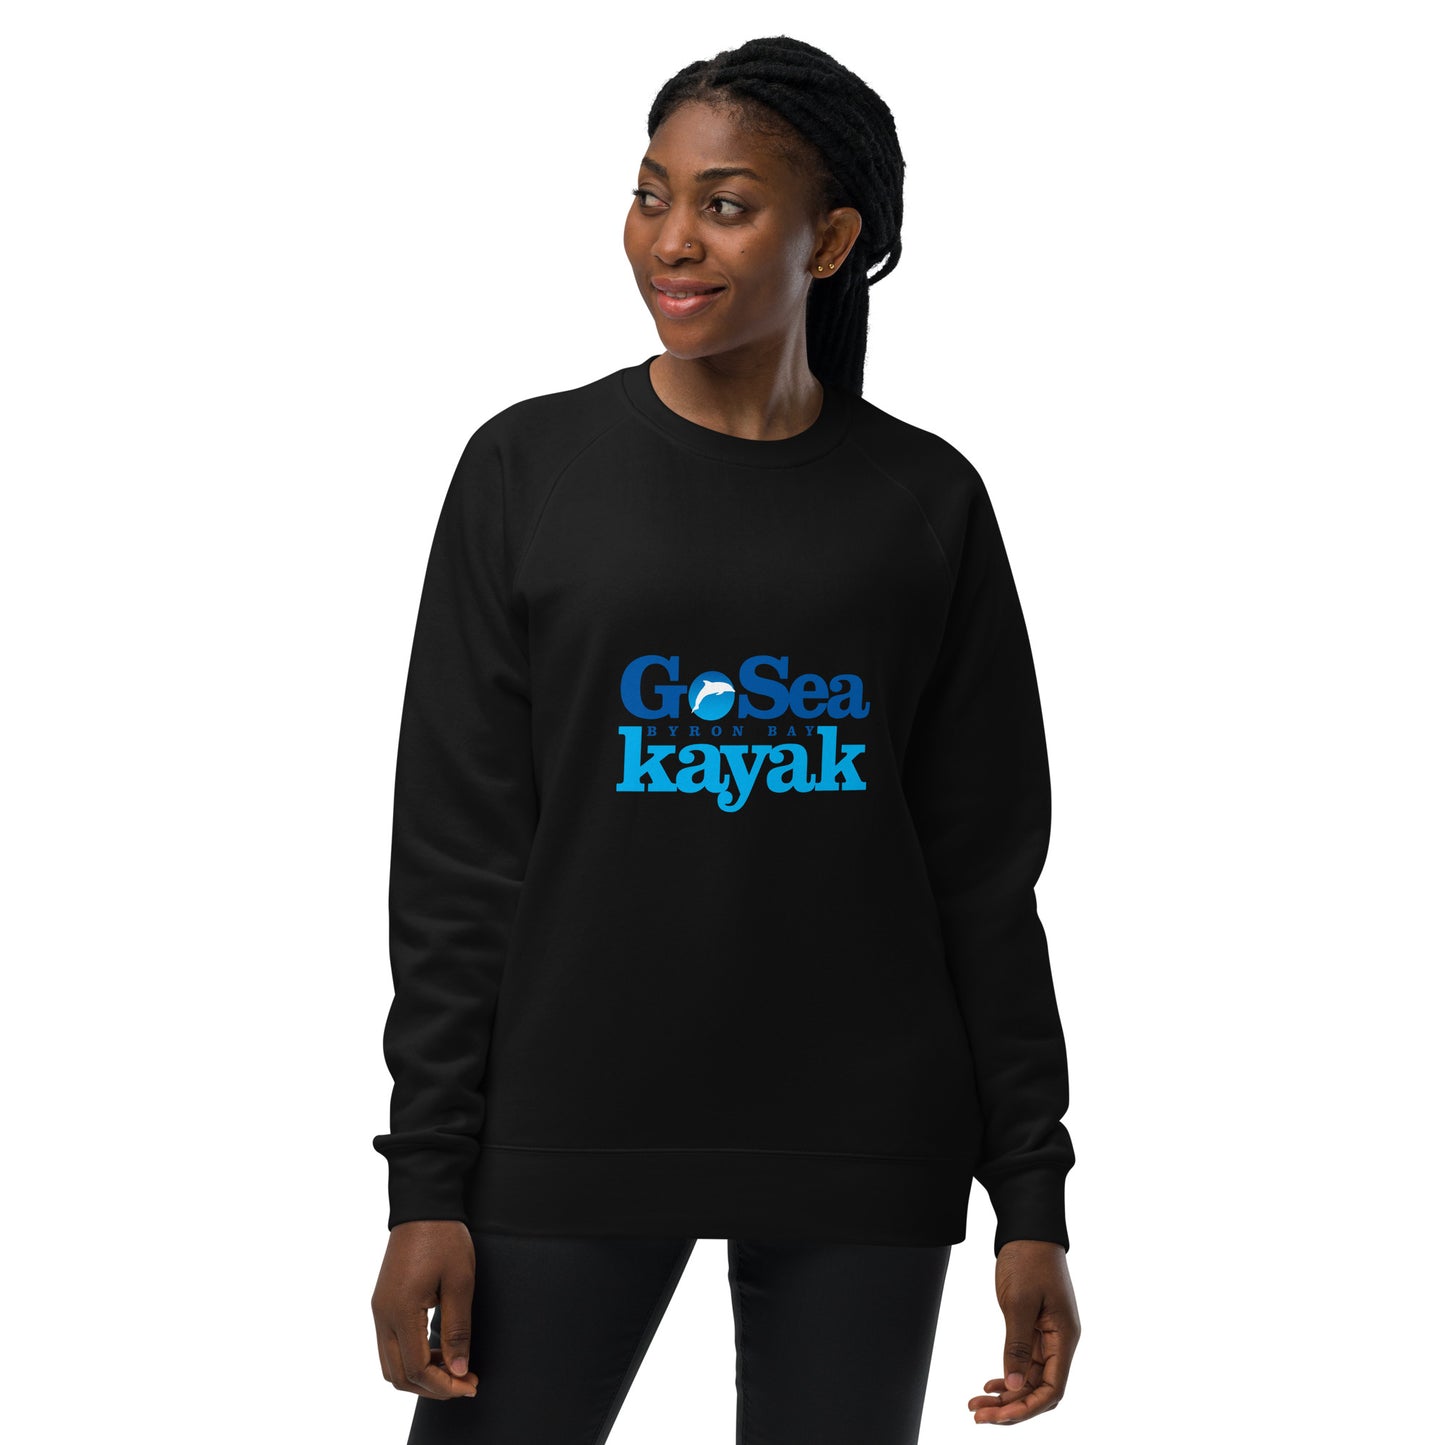  Unisex Sweatshirt - Black - Front view being warn by woman with arms by side - Go Sea Kayak Byron Bay logo on front - Genuine Byron Bay Merchandise | Produced by Go Sea Kayak Byron Bay 